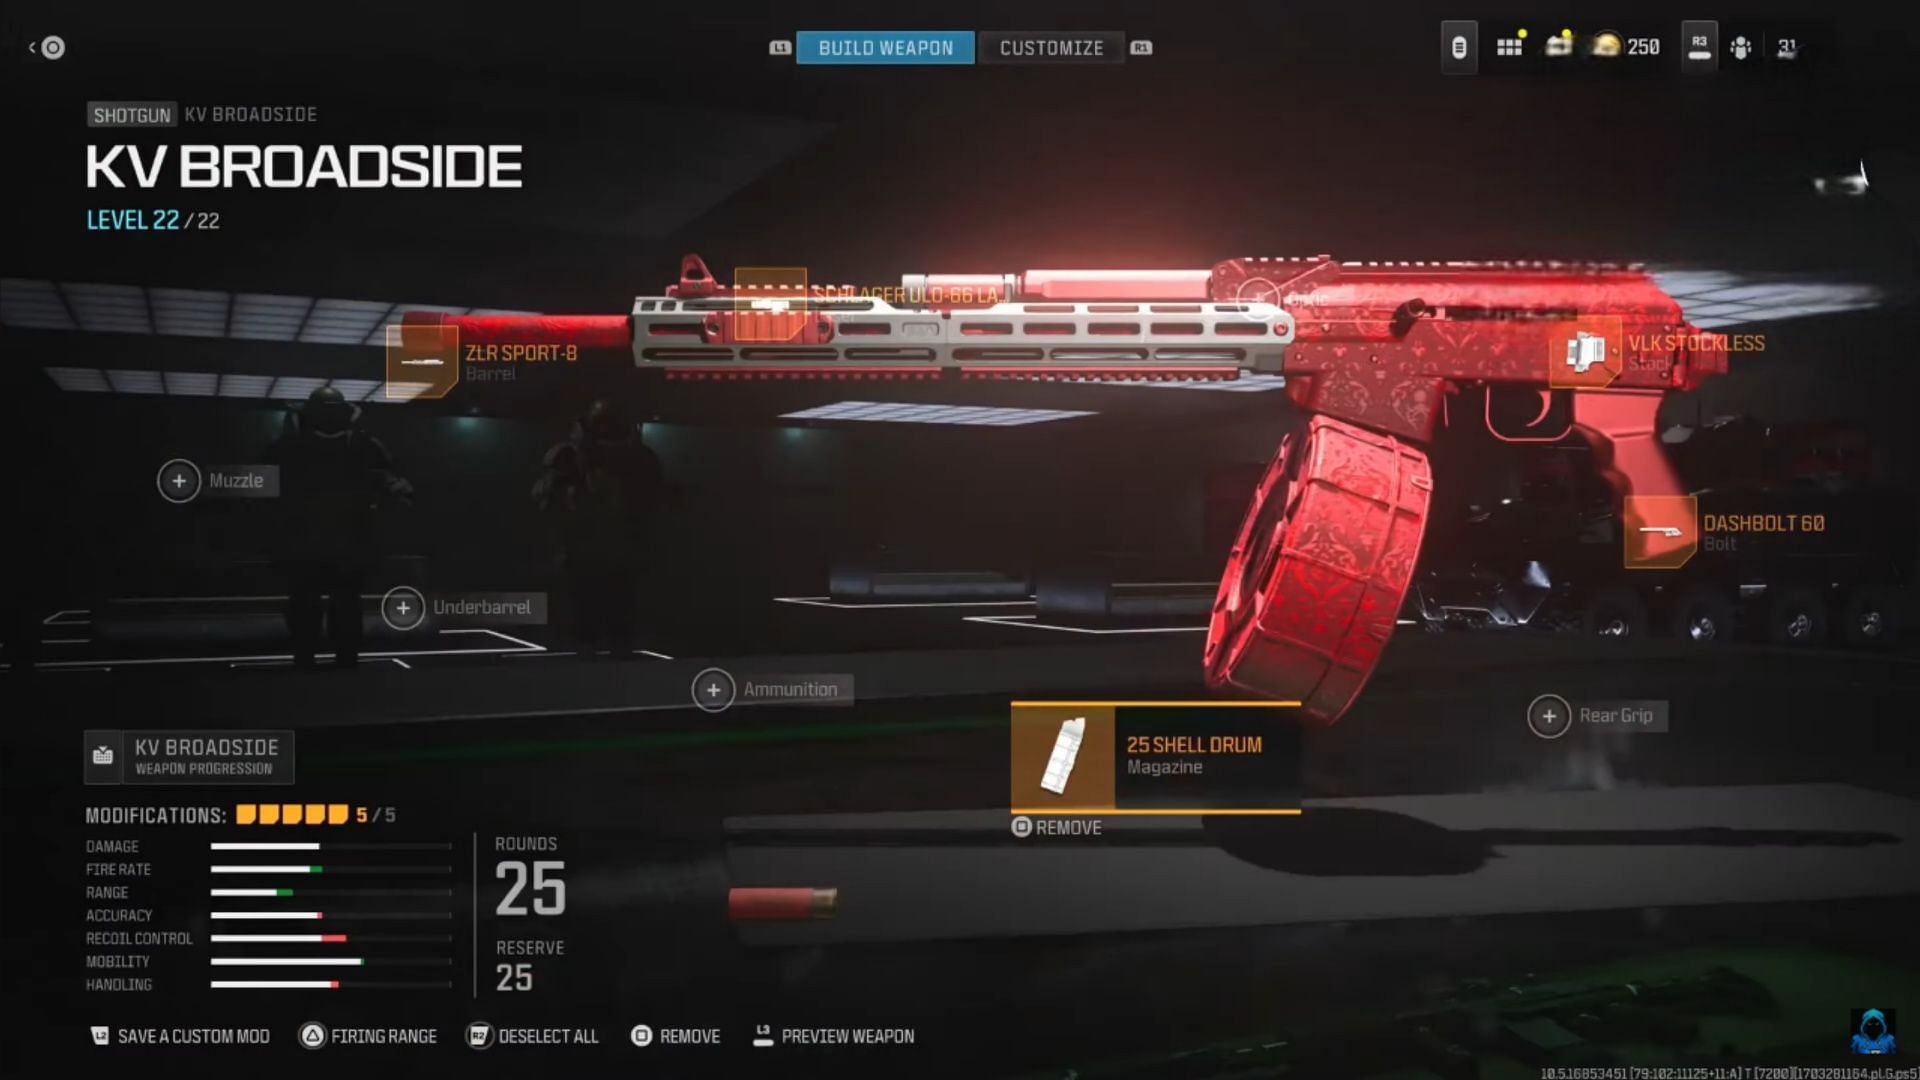 KV Broadside loadout (Image via Activision and YouTube/ItzEpic)